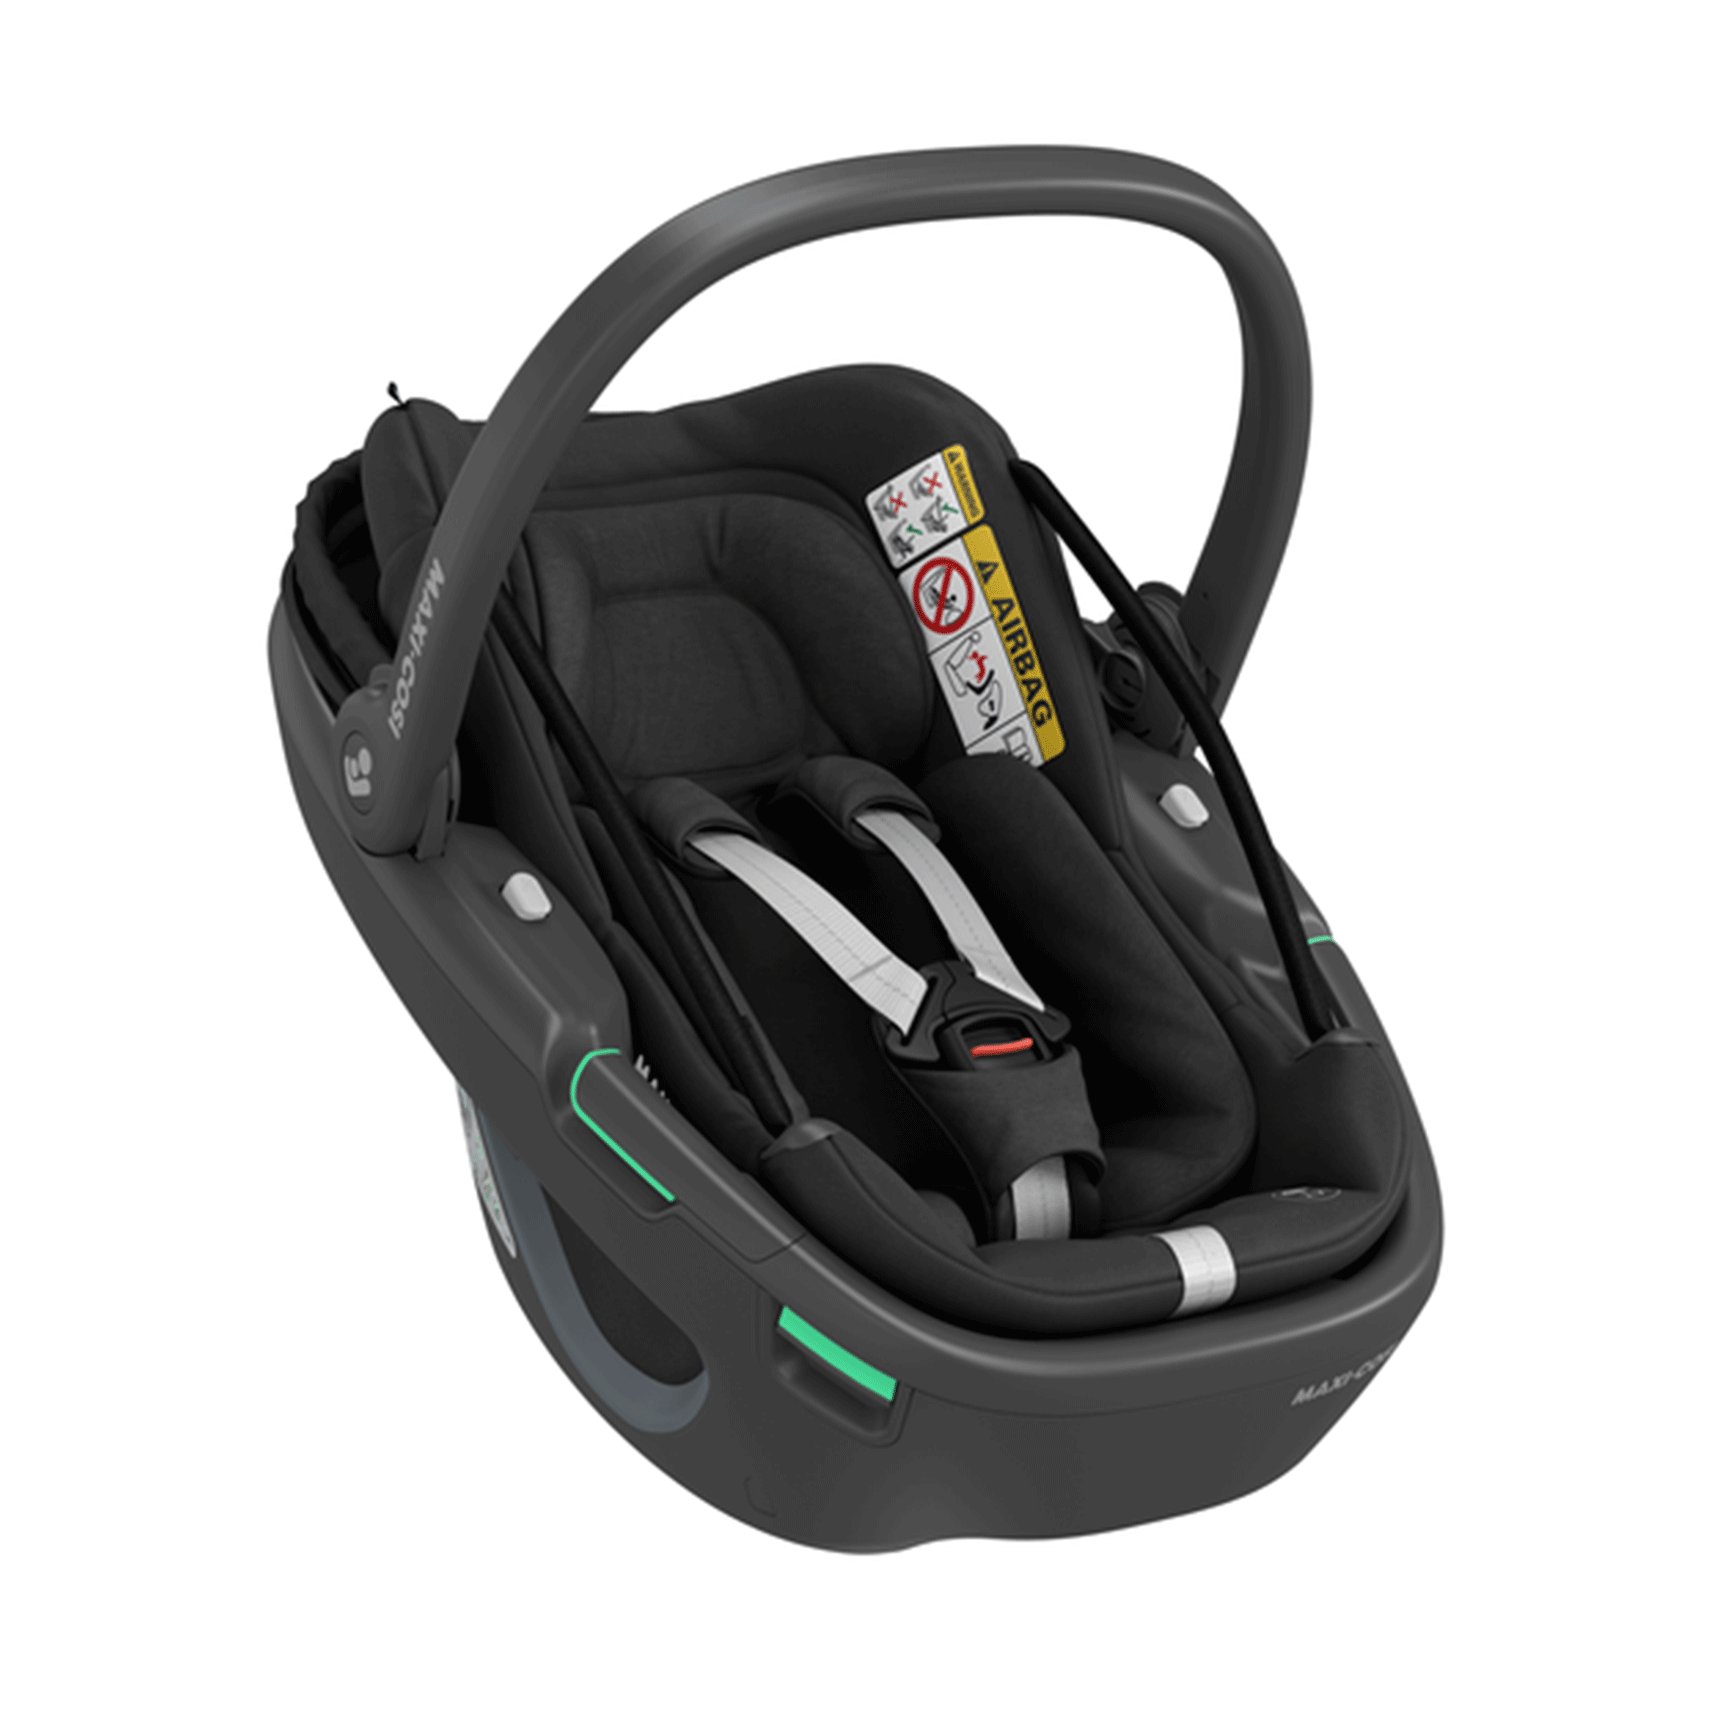 Maxi-Cosi baby car seats Maxi Cosi Coral 360 Car Seat Essential Black with Black Shell 8559672301-1